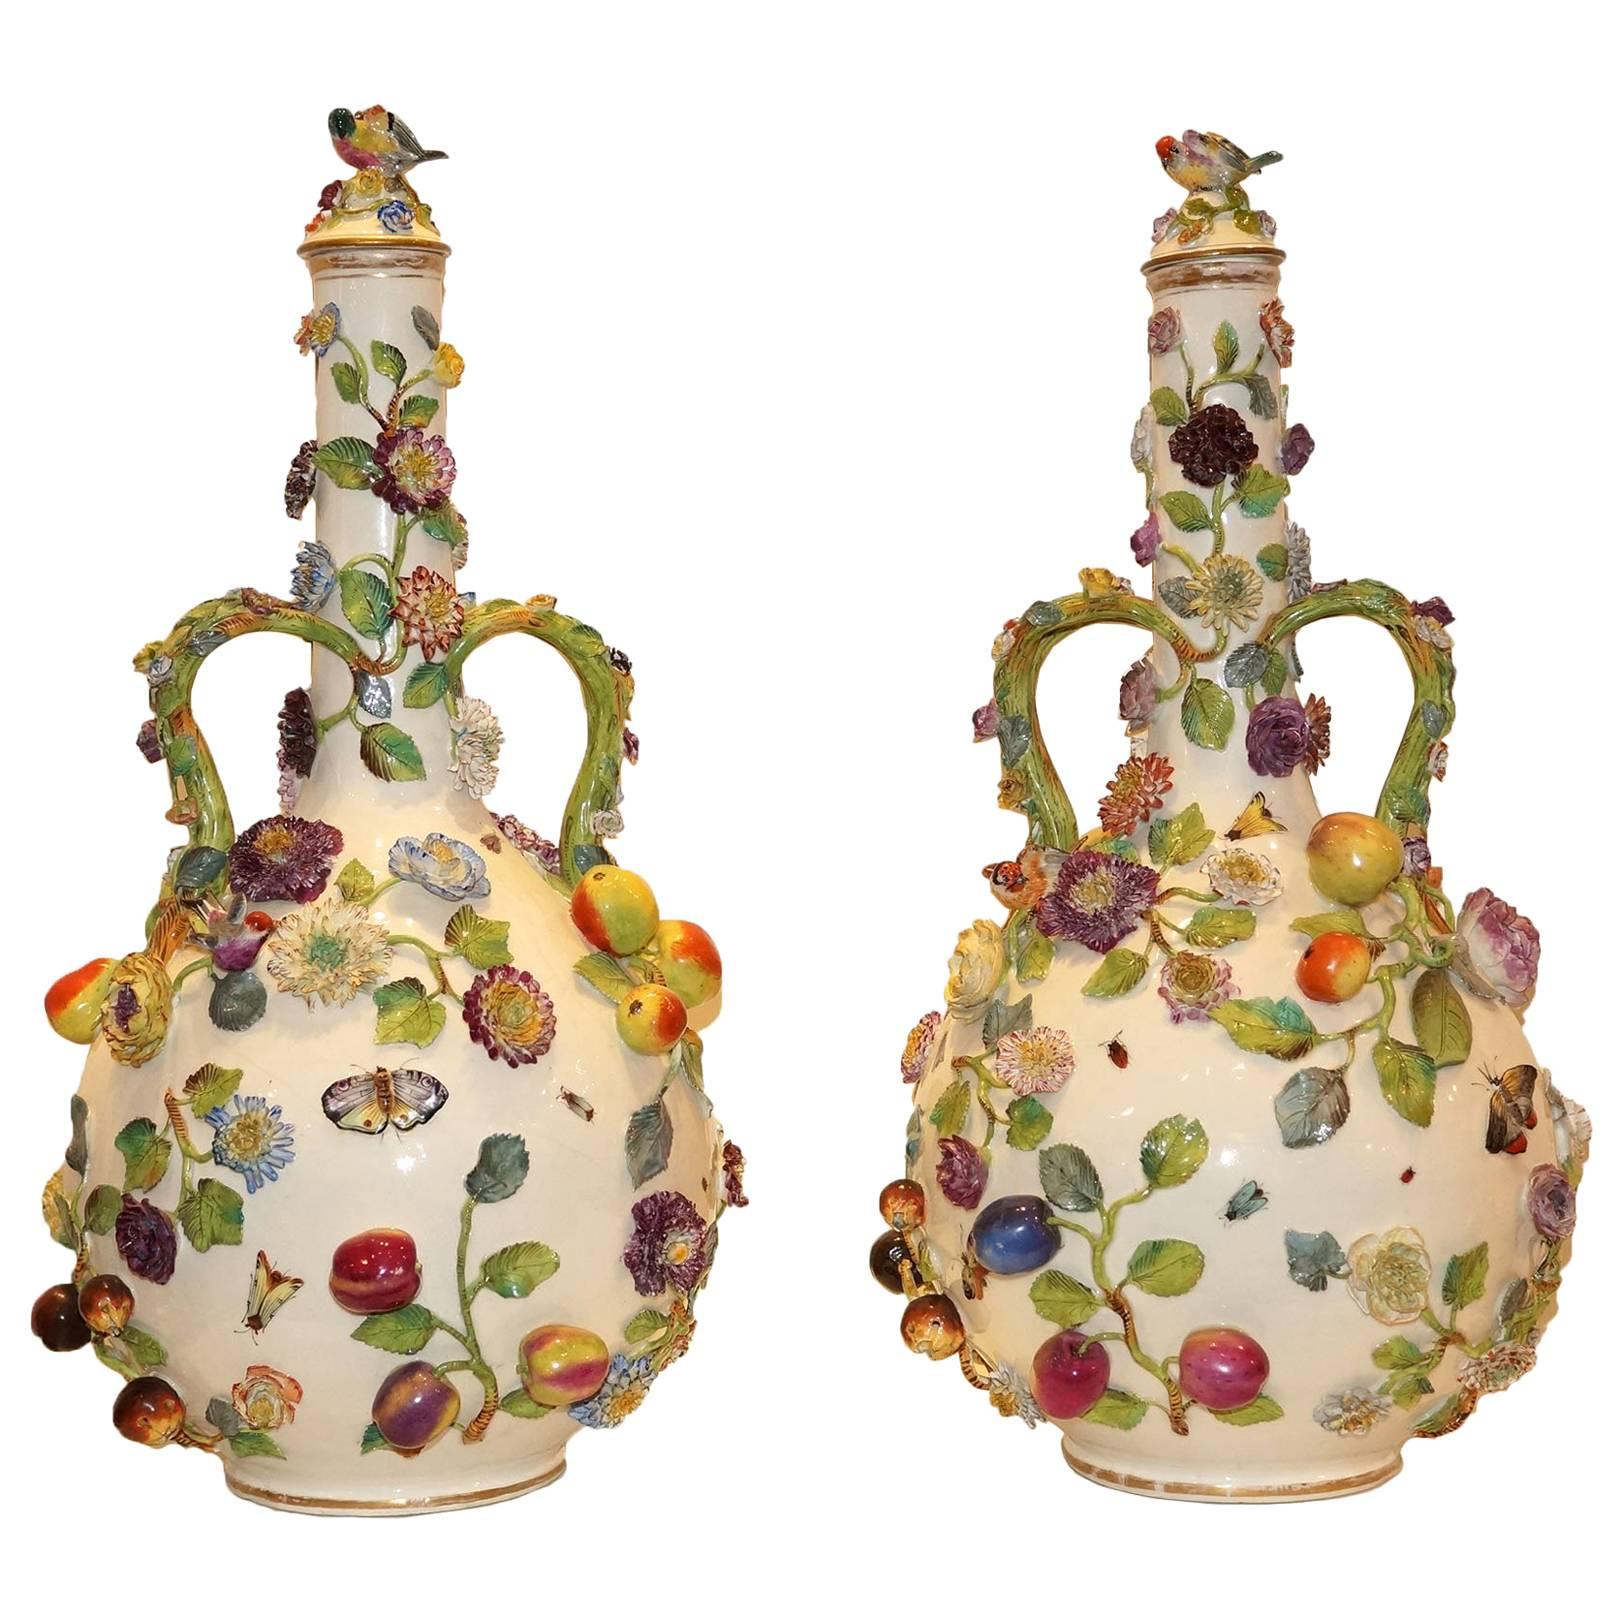 Pair of Continental Porcelain Bottle Form Vases with applied Fruits and Flowers